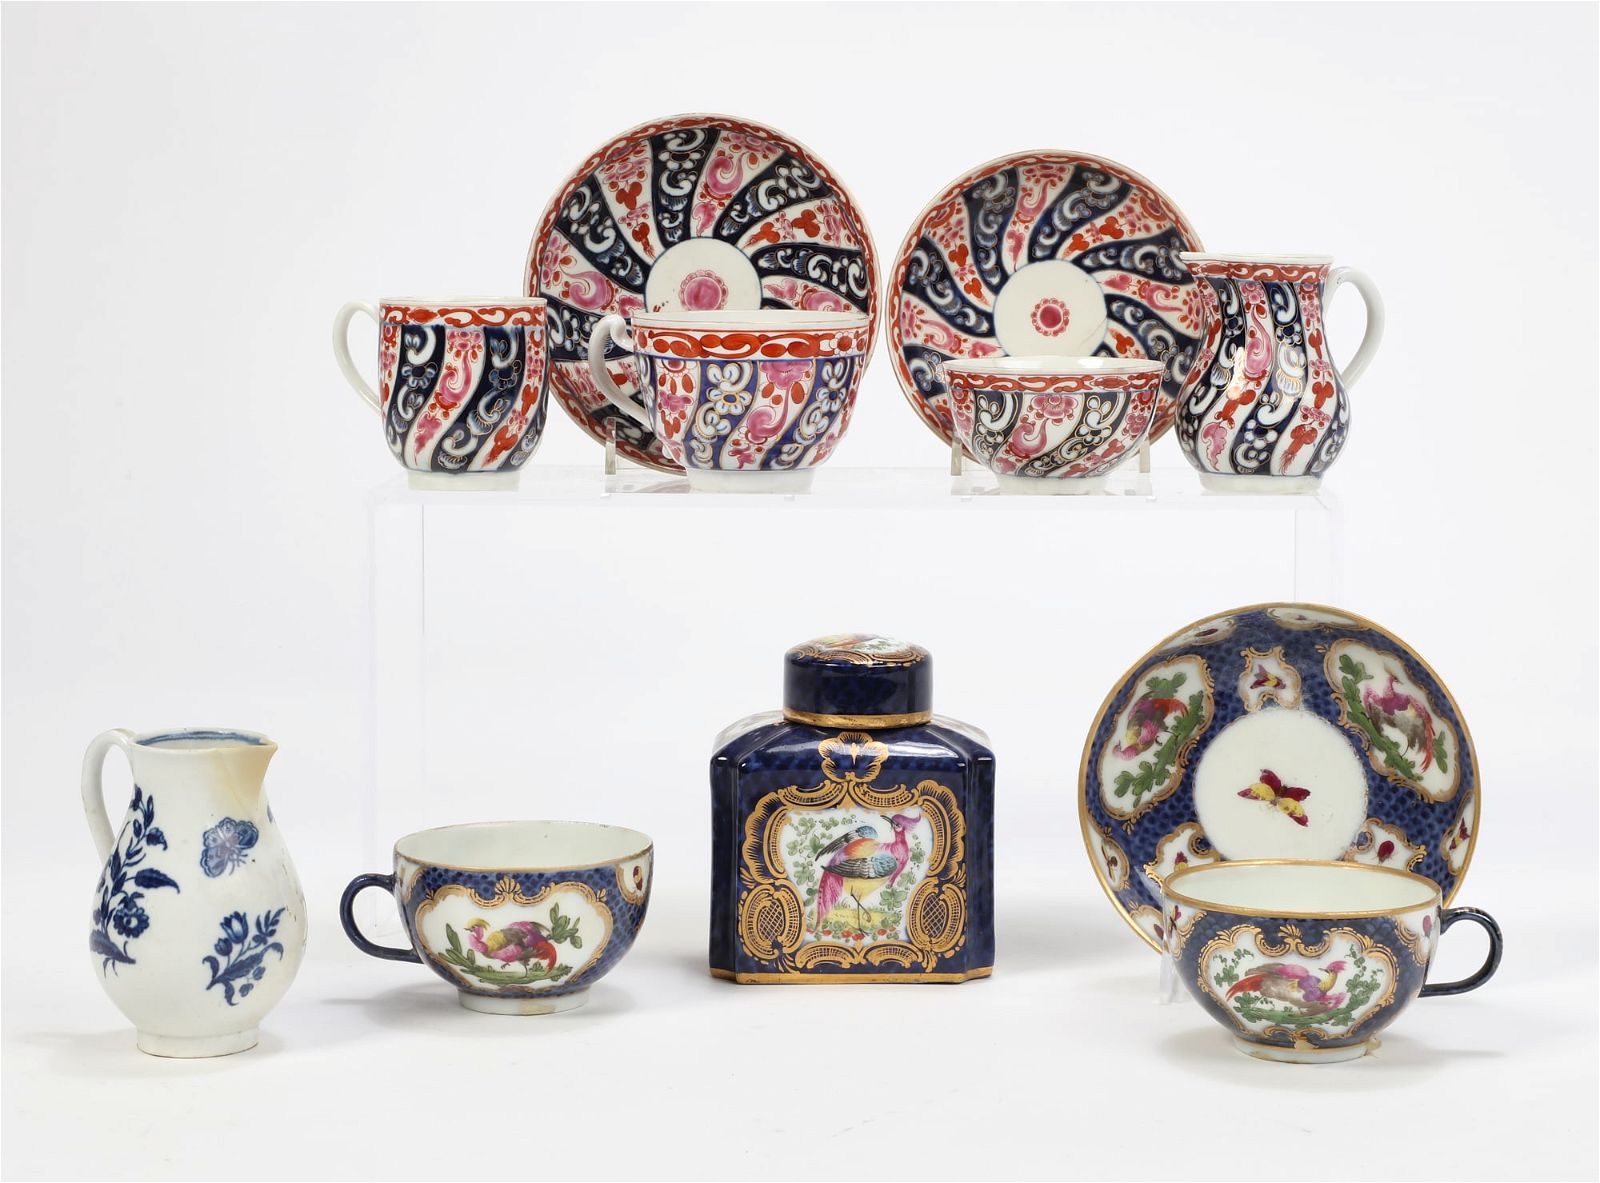 A COLLECTION OF EARLY ENGLISH PORCELAINA